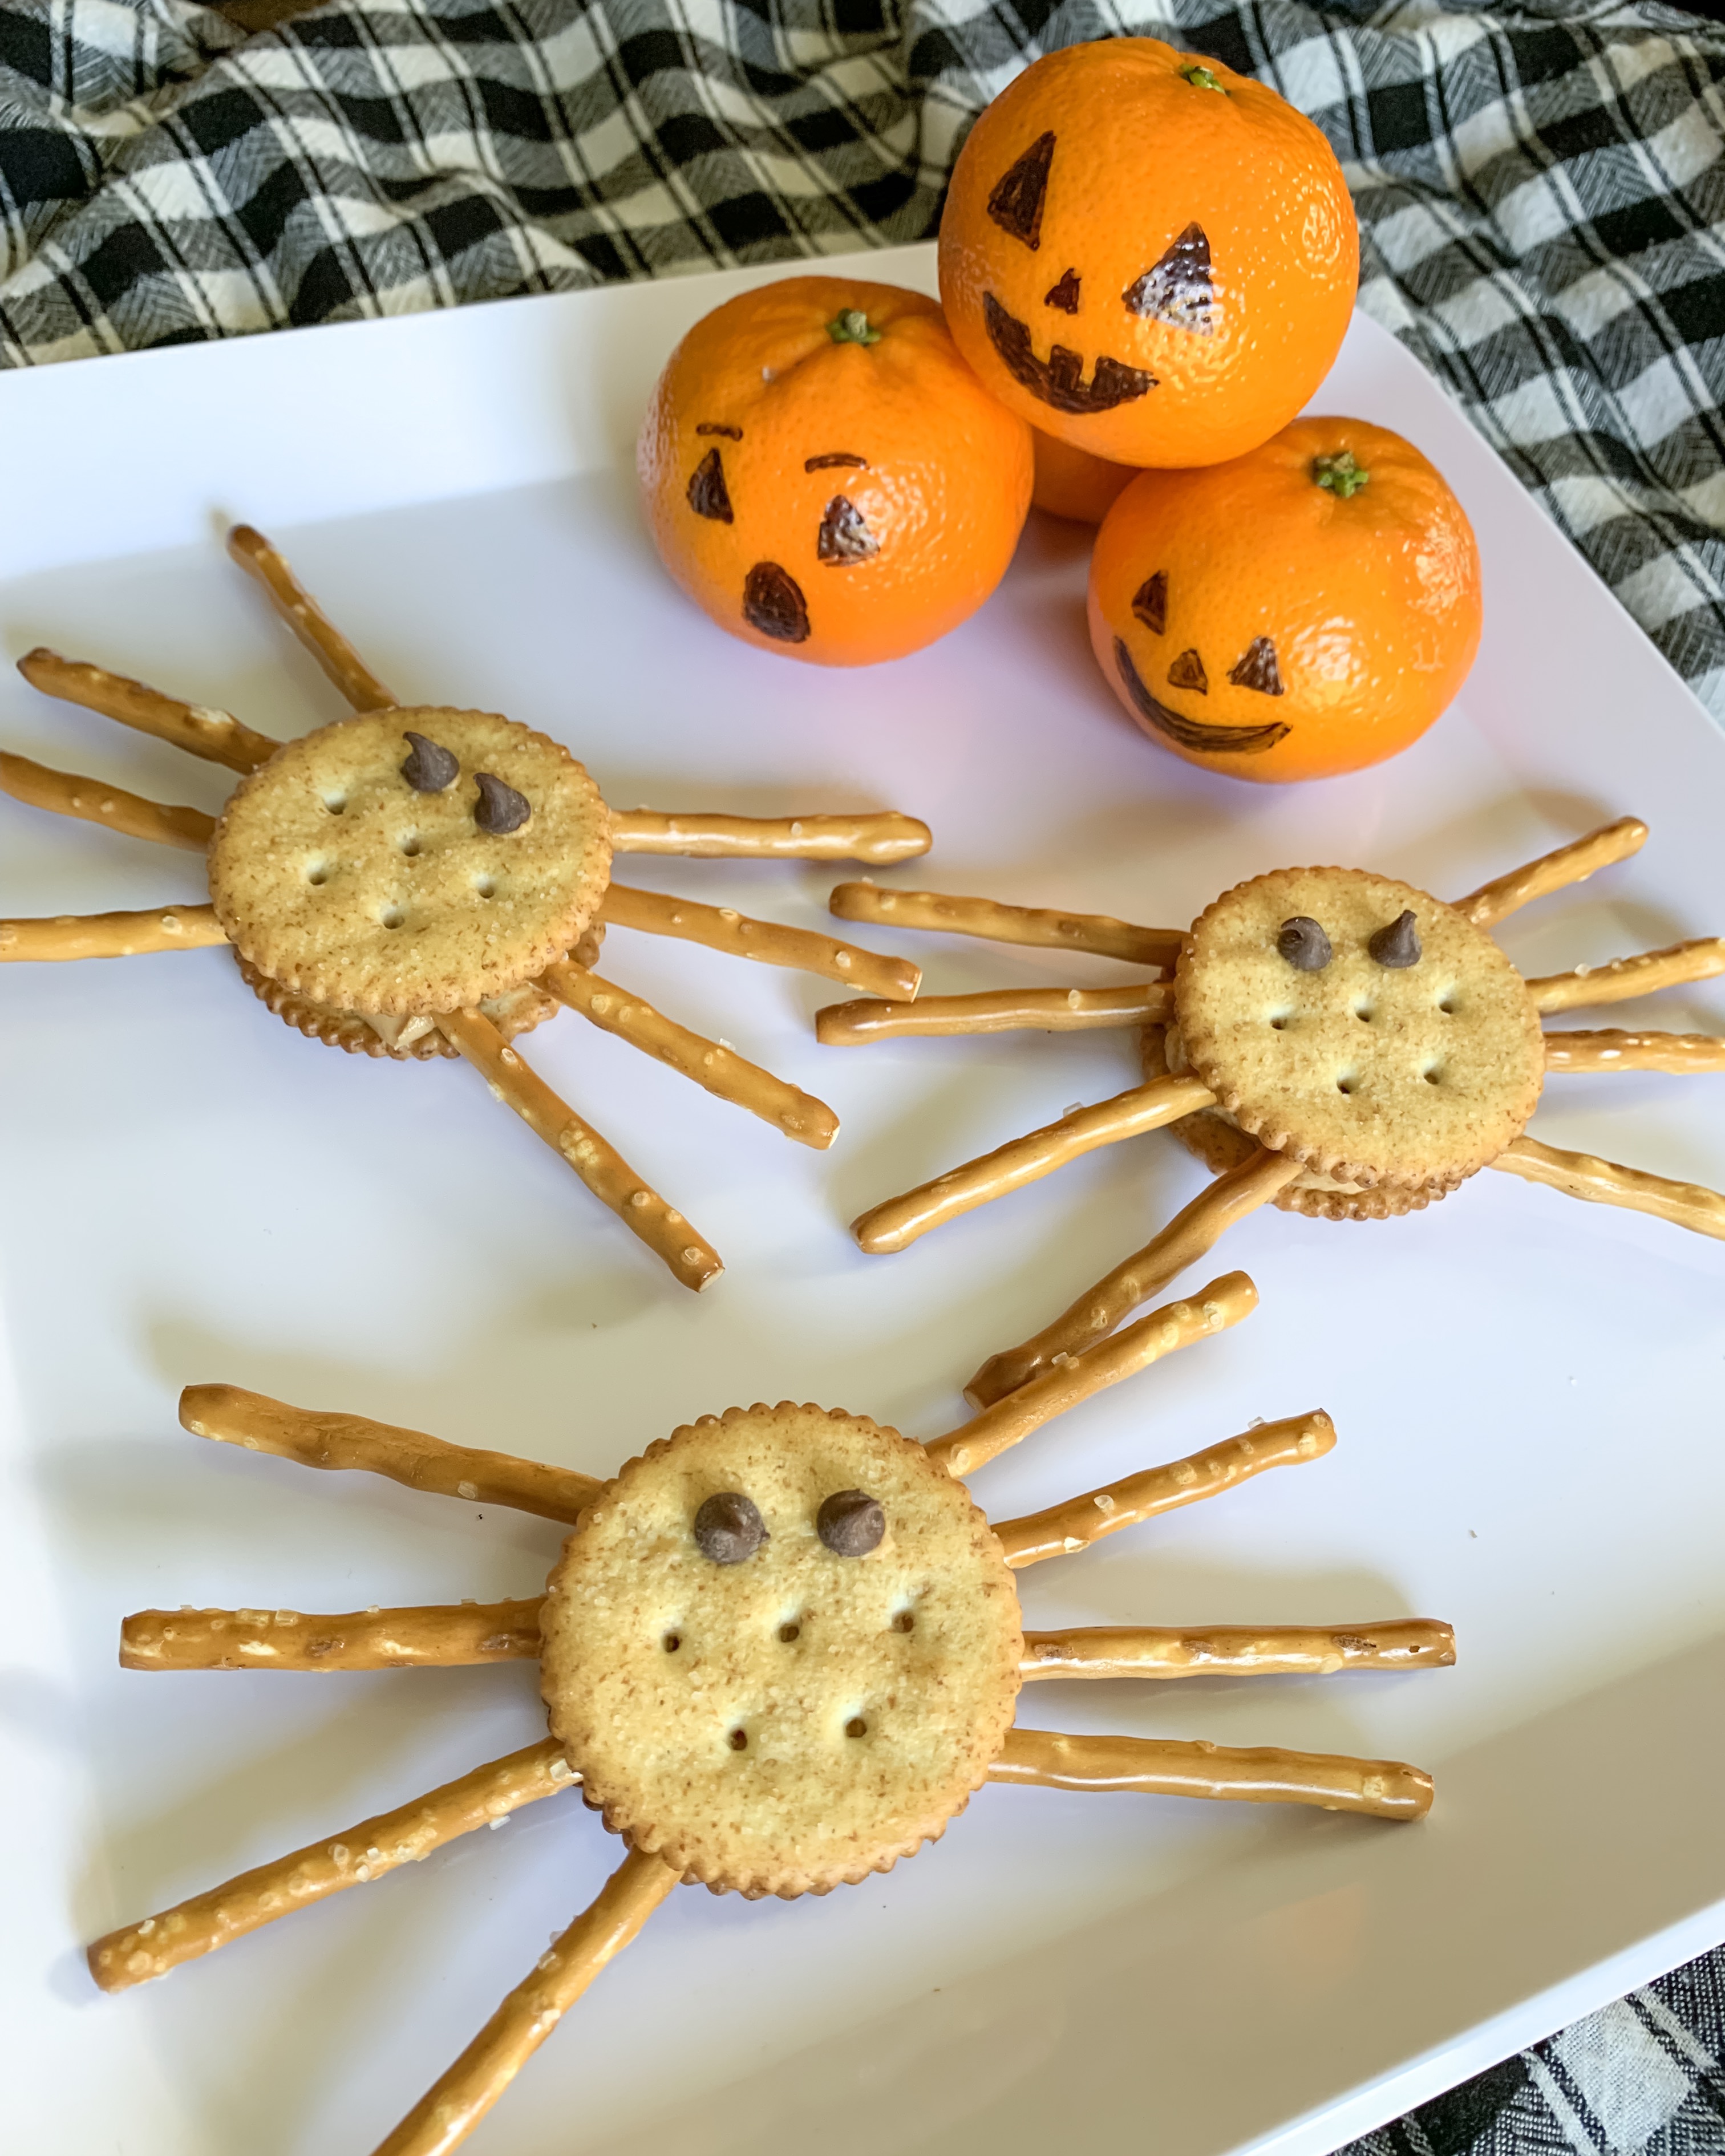 Spider Snack to Make With Your Kids